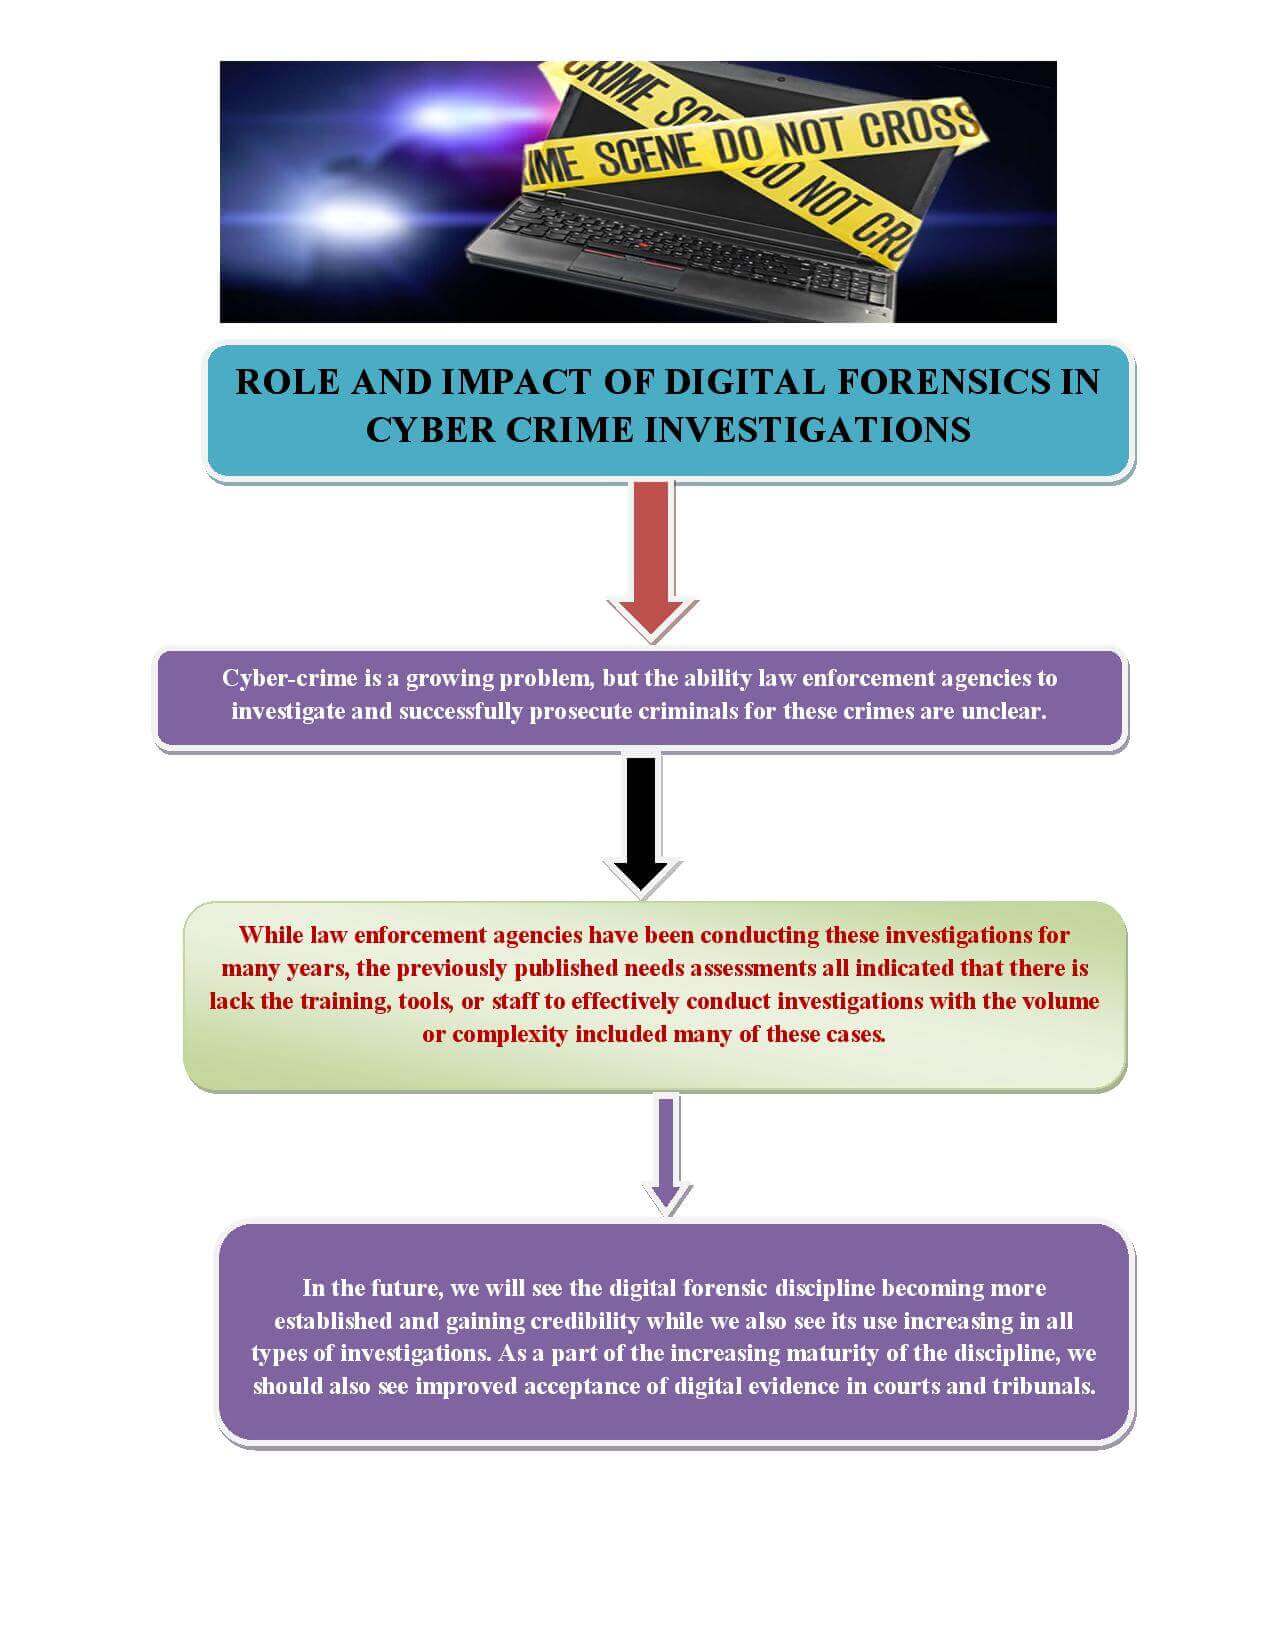 ROLE AND IMPACT OF DIGITAL FORENSICS IN CYBER CRIME INVESTIGATIONS